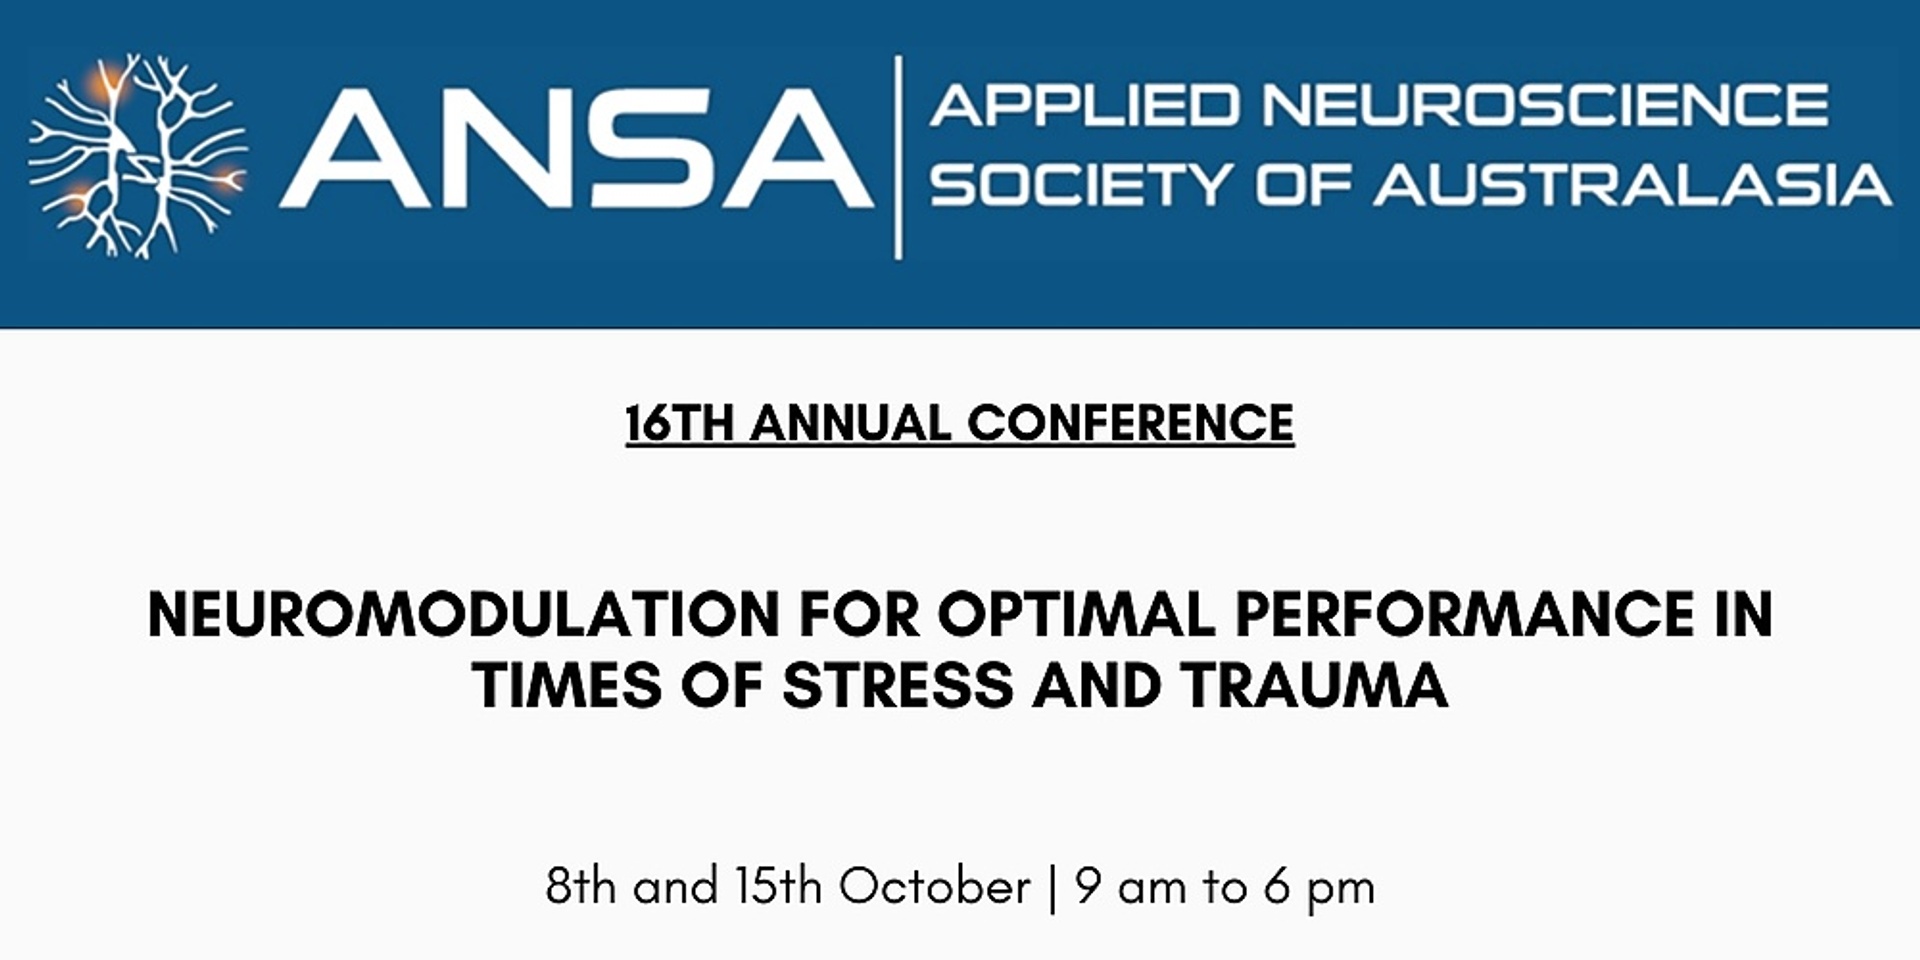 ANSA 16TH ANNUAL CONFERENCE | Neuromodulation for Optimal Performance in Times of Stress and Trauma